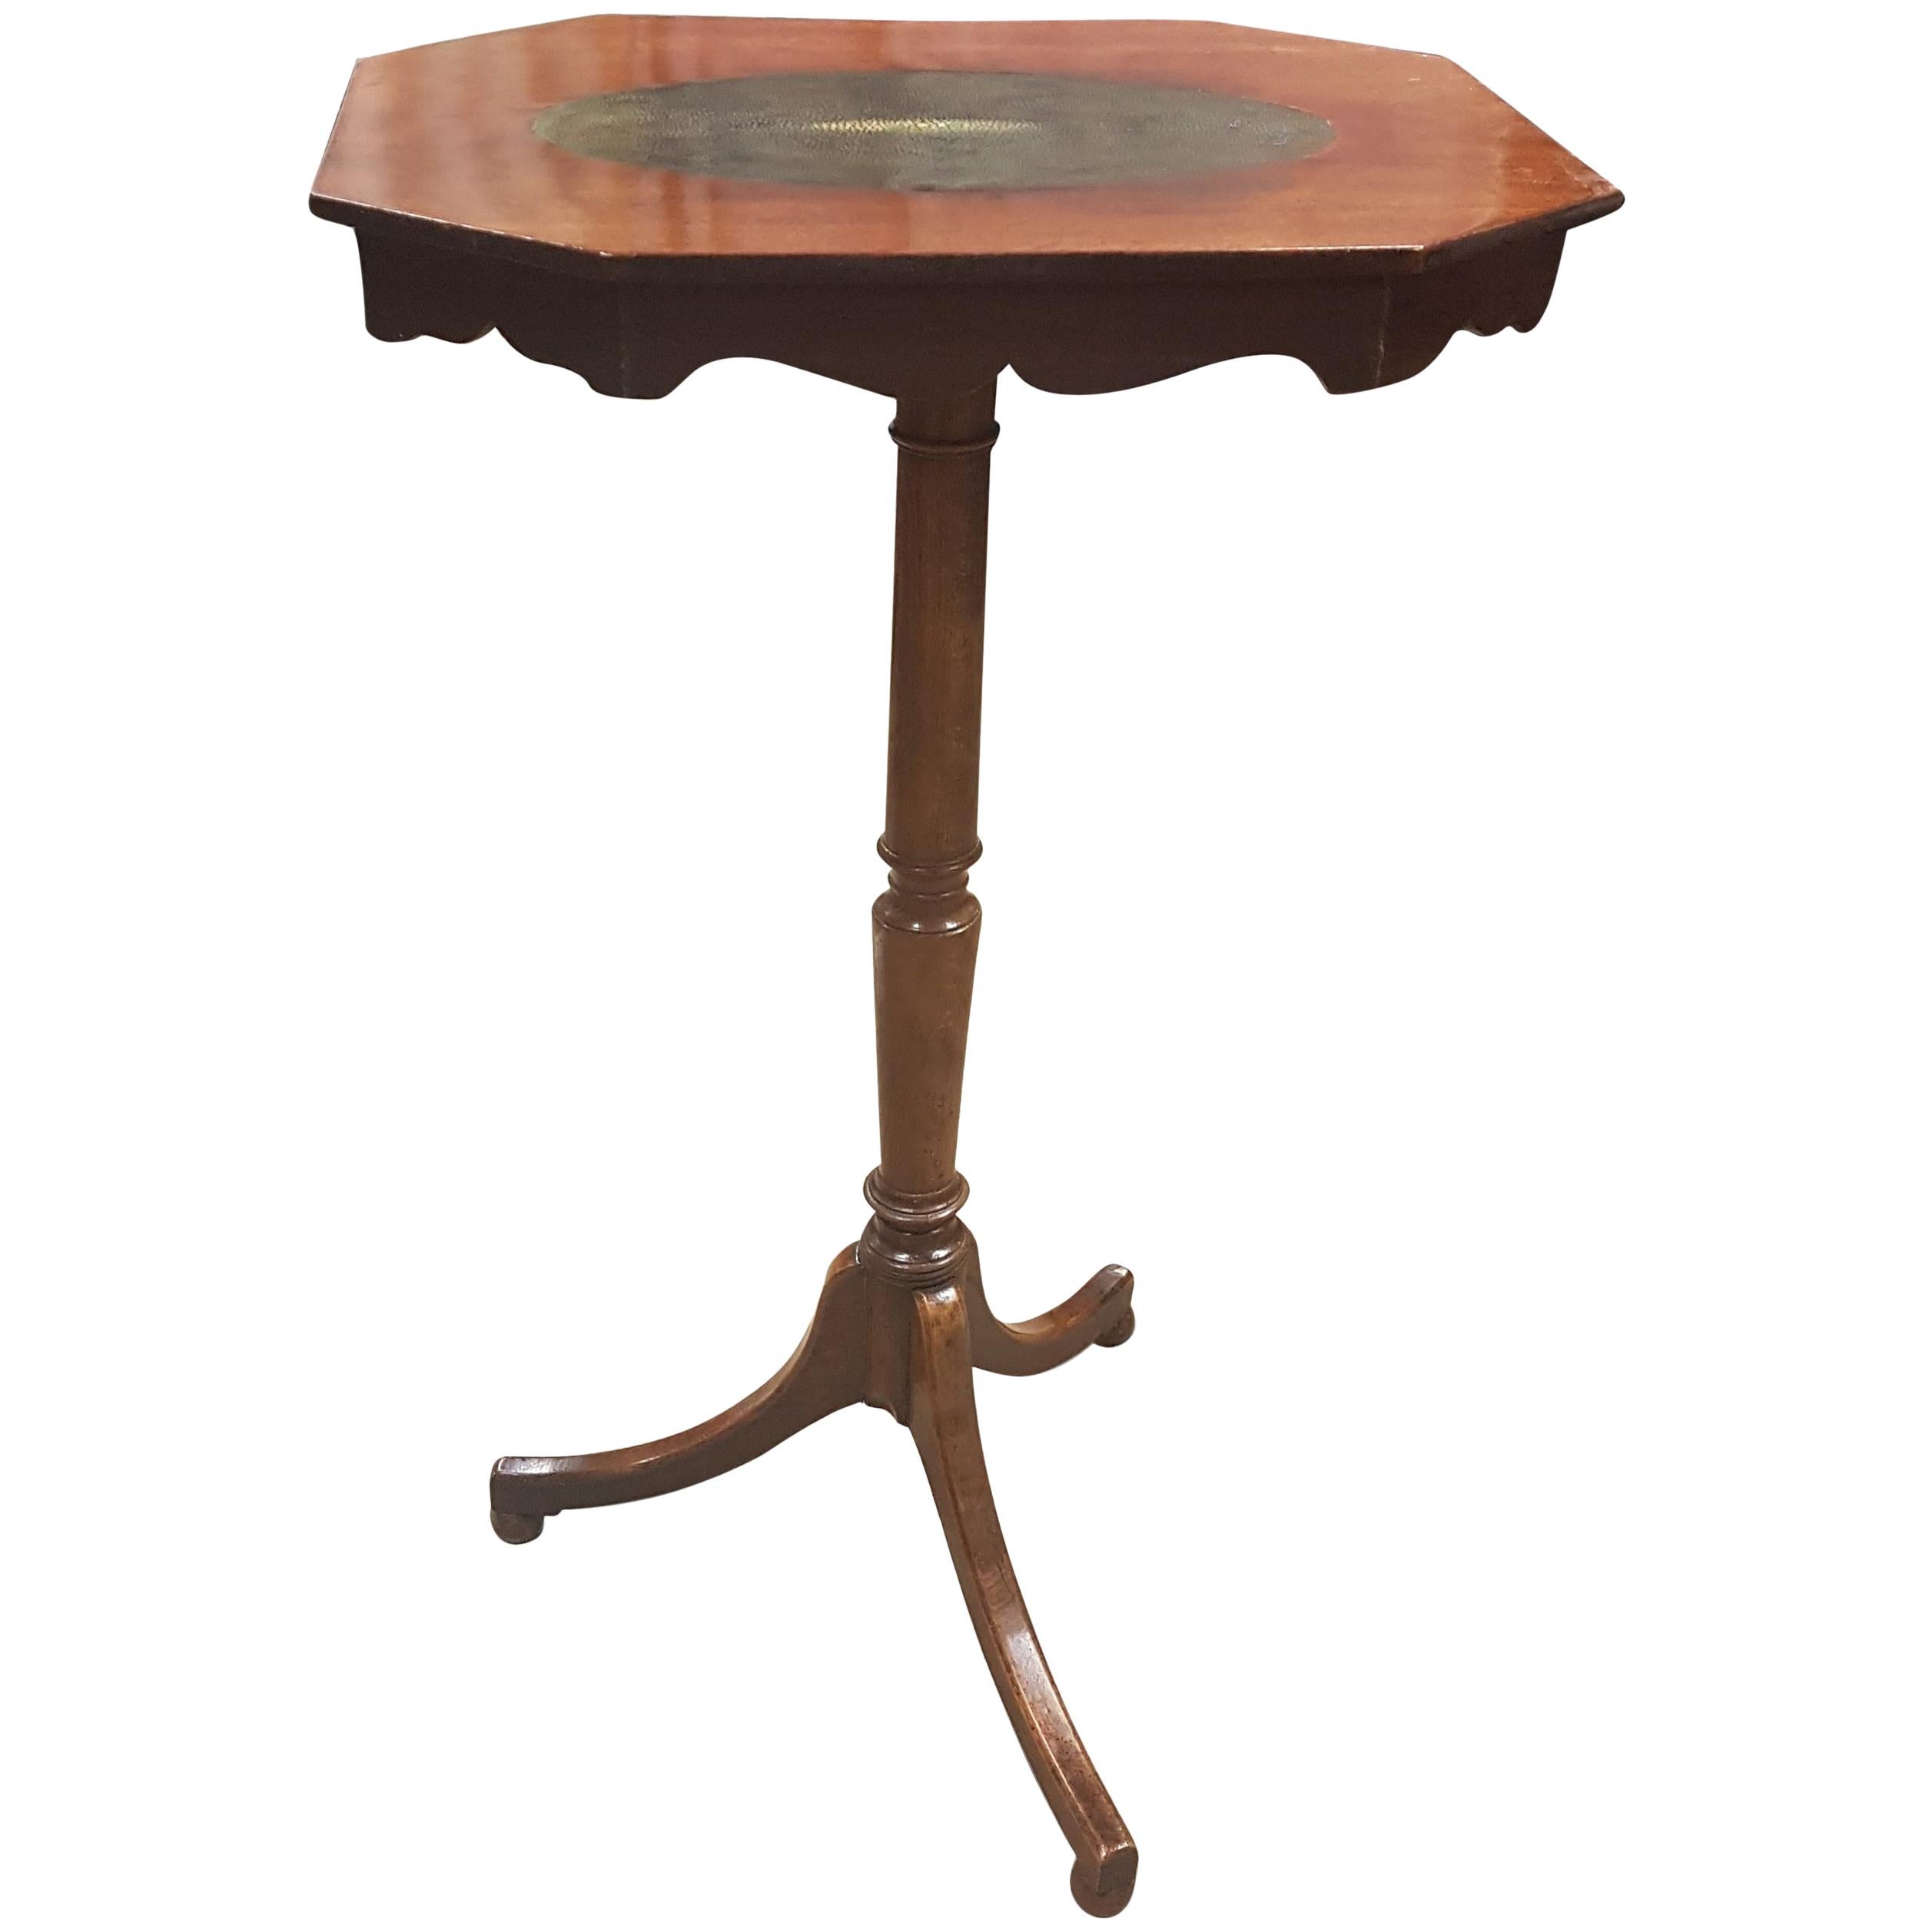 George 3rd Mahogany Tripod Table With Shagreen Inlay For Sale